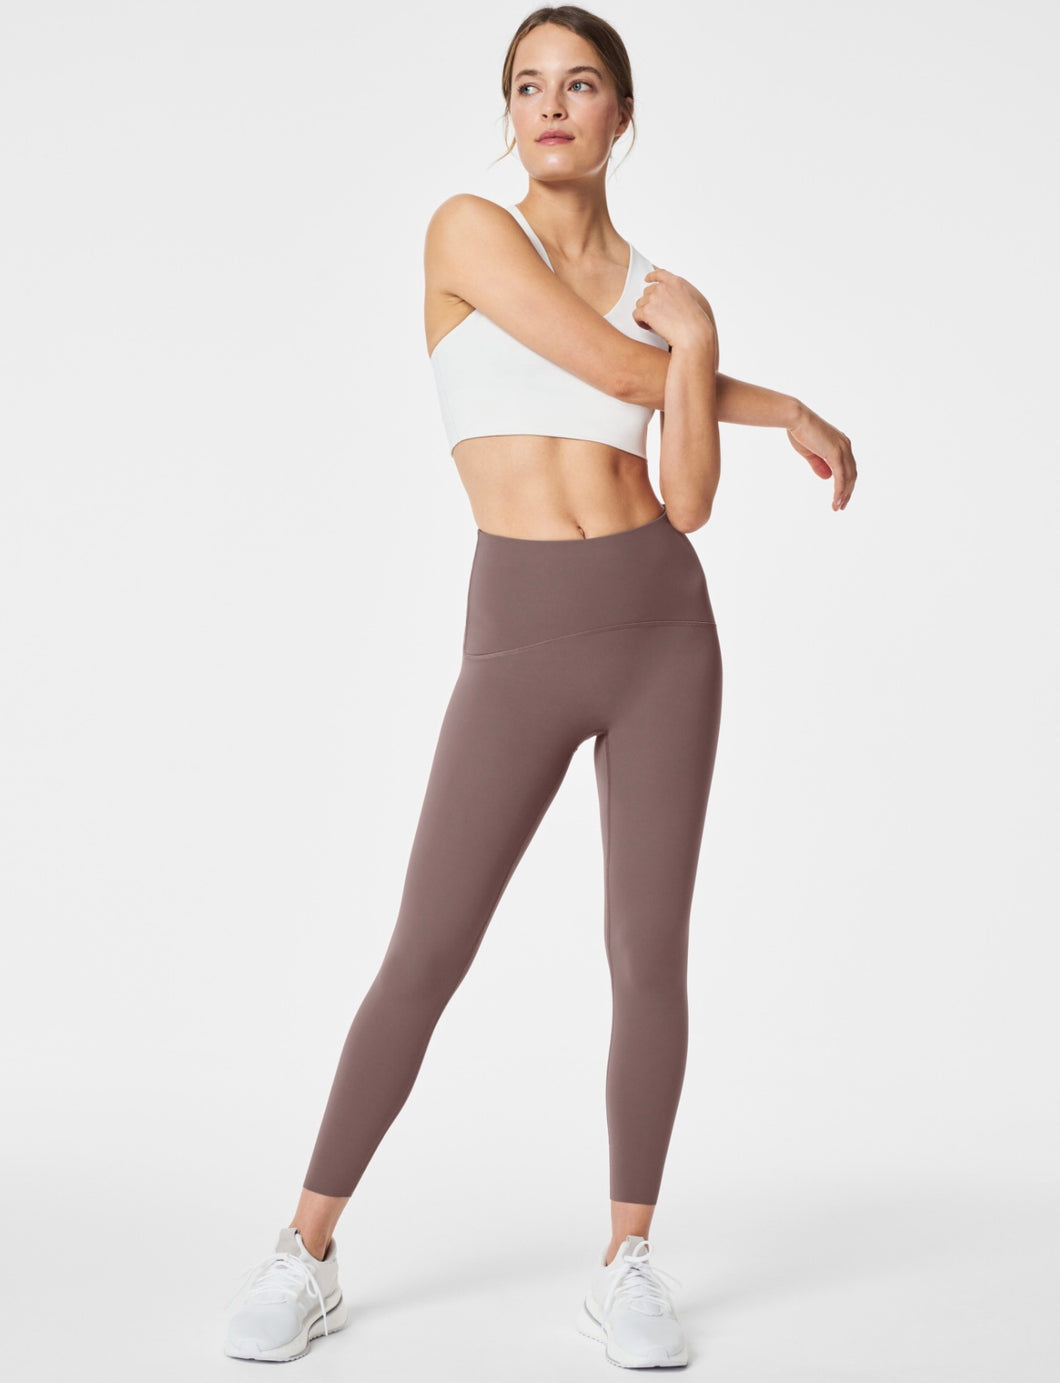 Spanx: Booty Boost 7/8 Active Leggings in Smoke 50186R